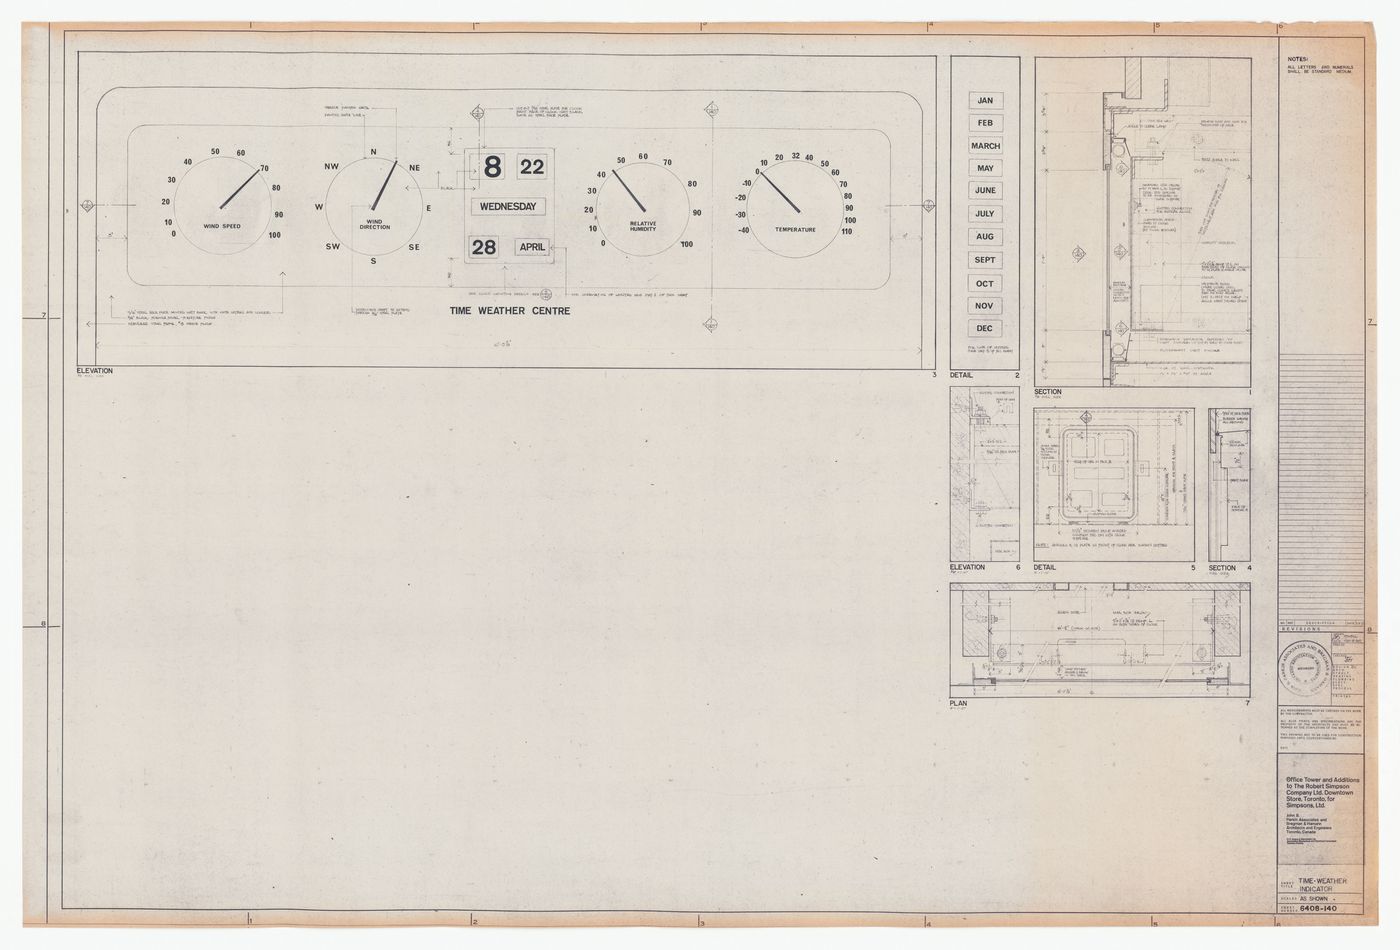 Time weather indicator drawing for construction for The Robert Simpson Company Limited Downtown Store, Office Tower and Additions, Toronto